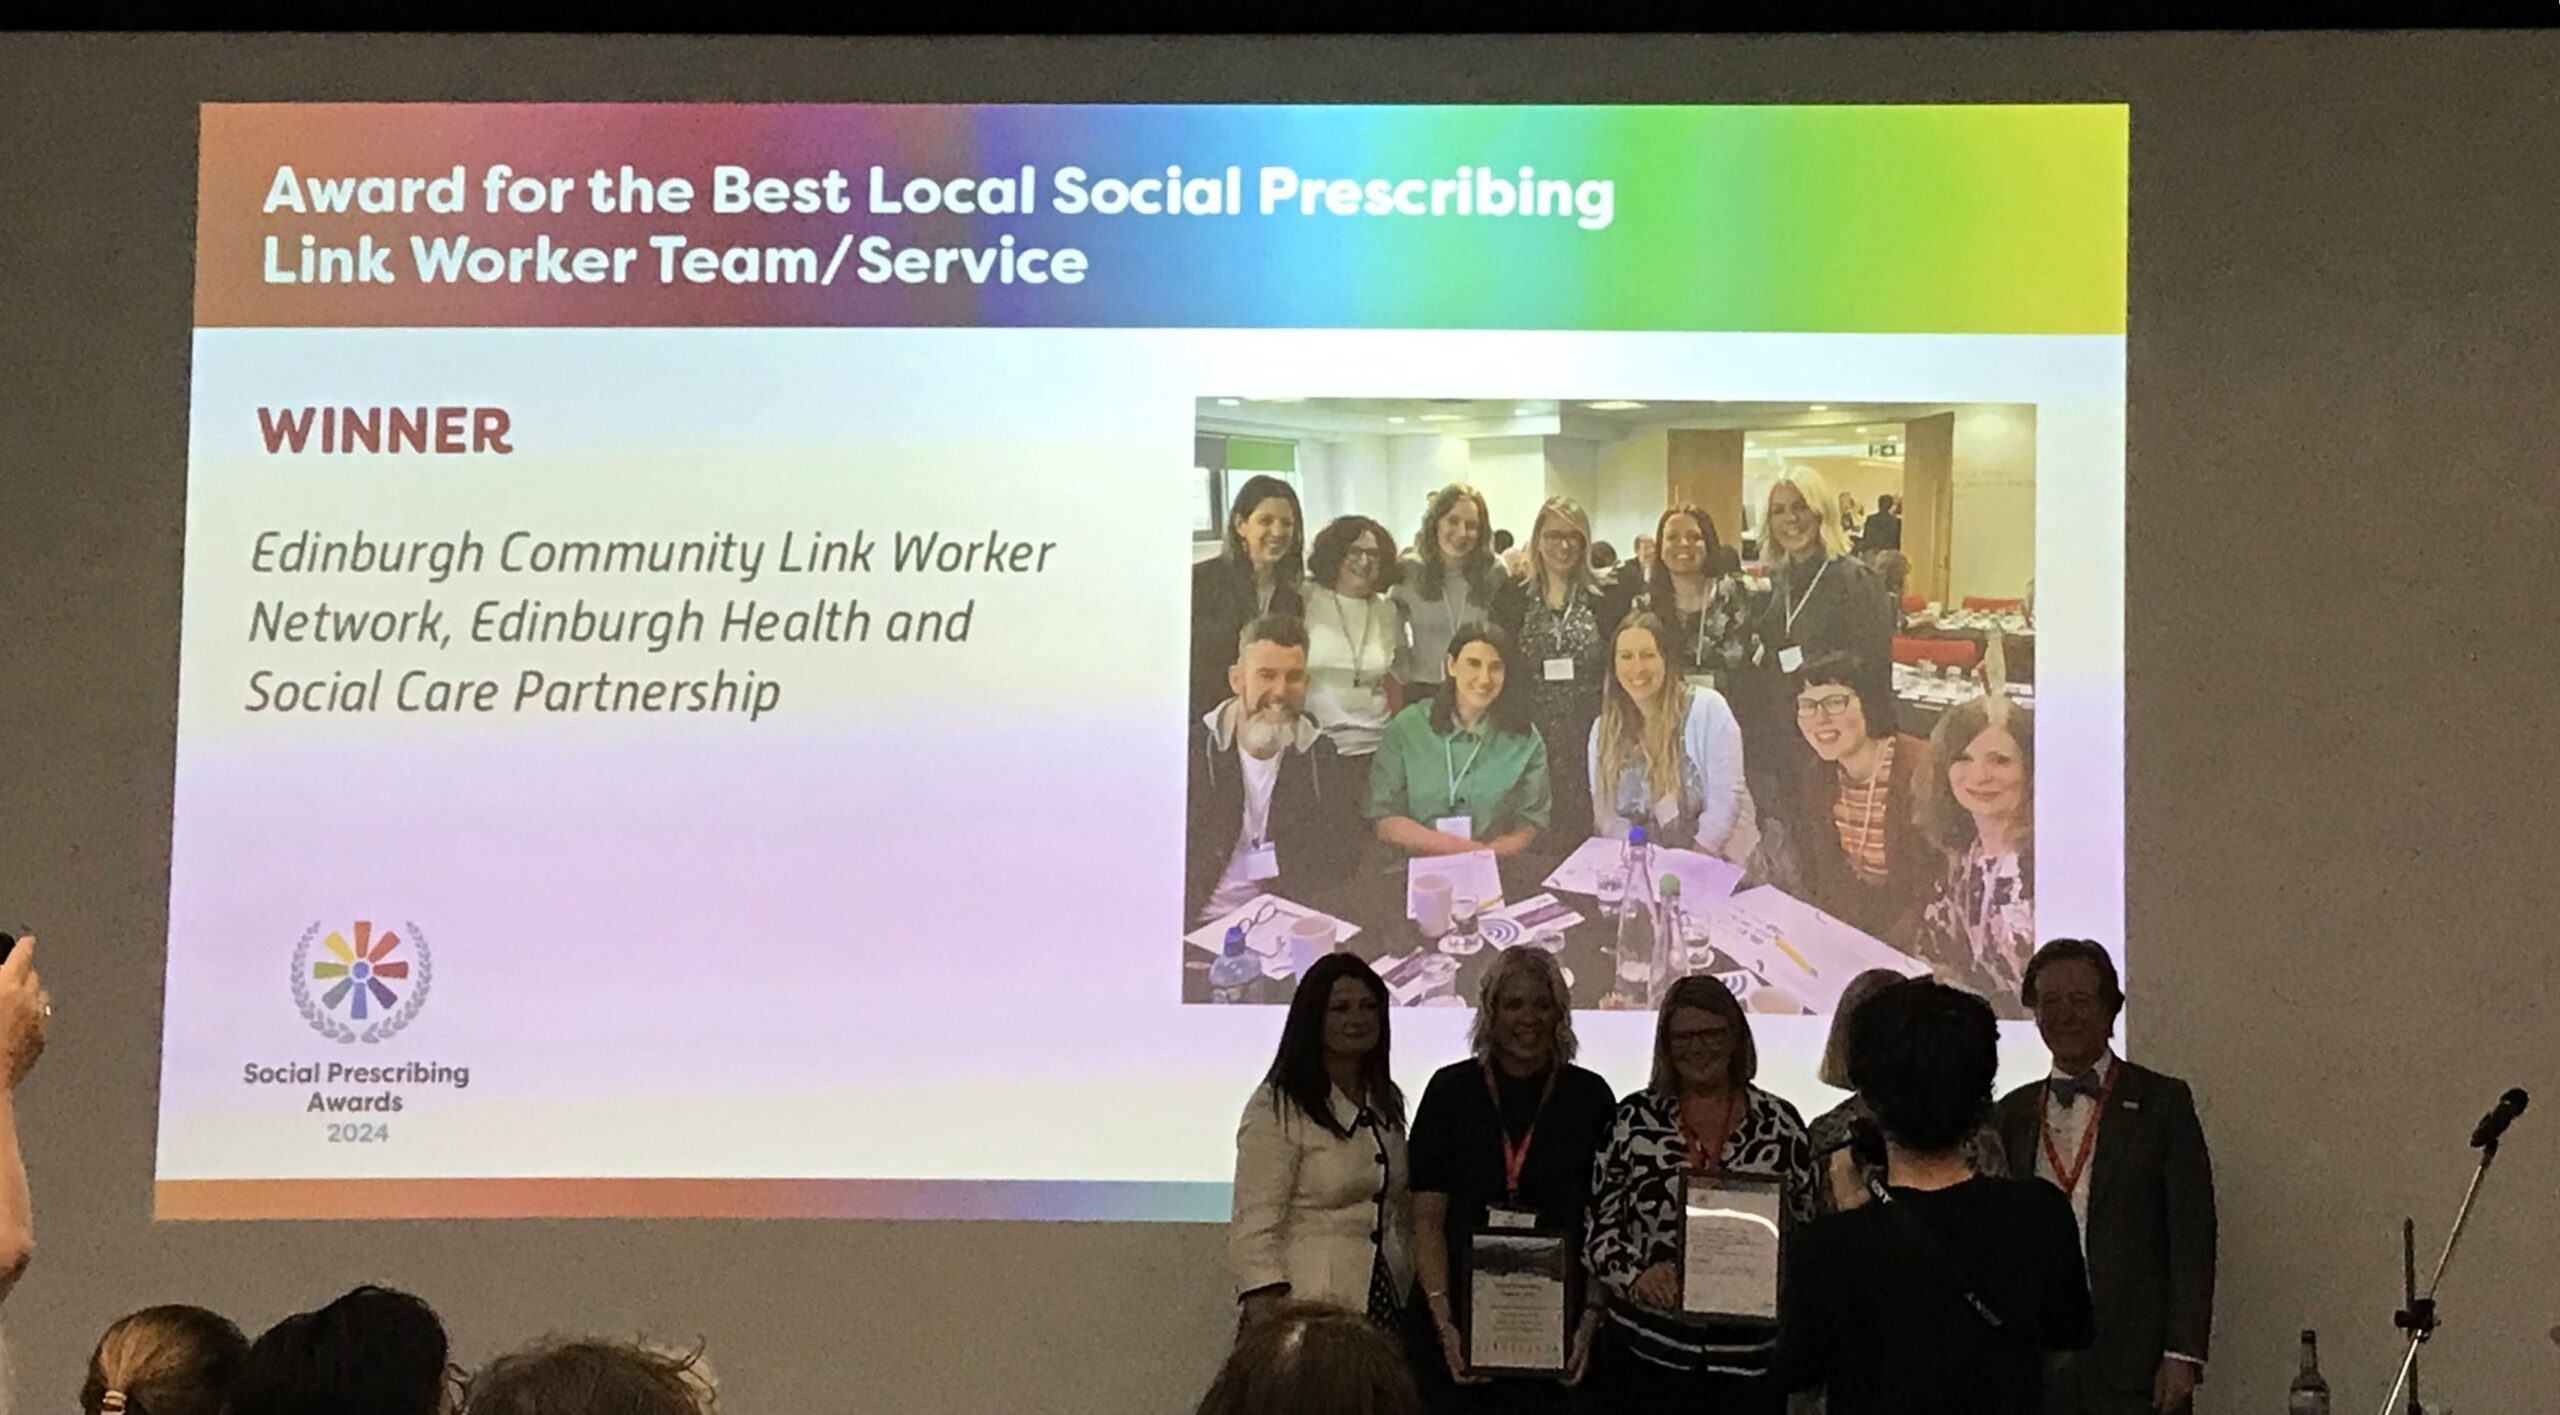 Group of individuals from the Edinburgh Community Link Worker Network accepting the 'Award for the Best Local Social Prescribing Link Worker/Service' at the Social Prescribing Awards 2024.